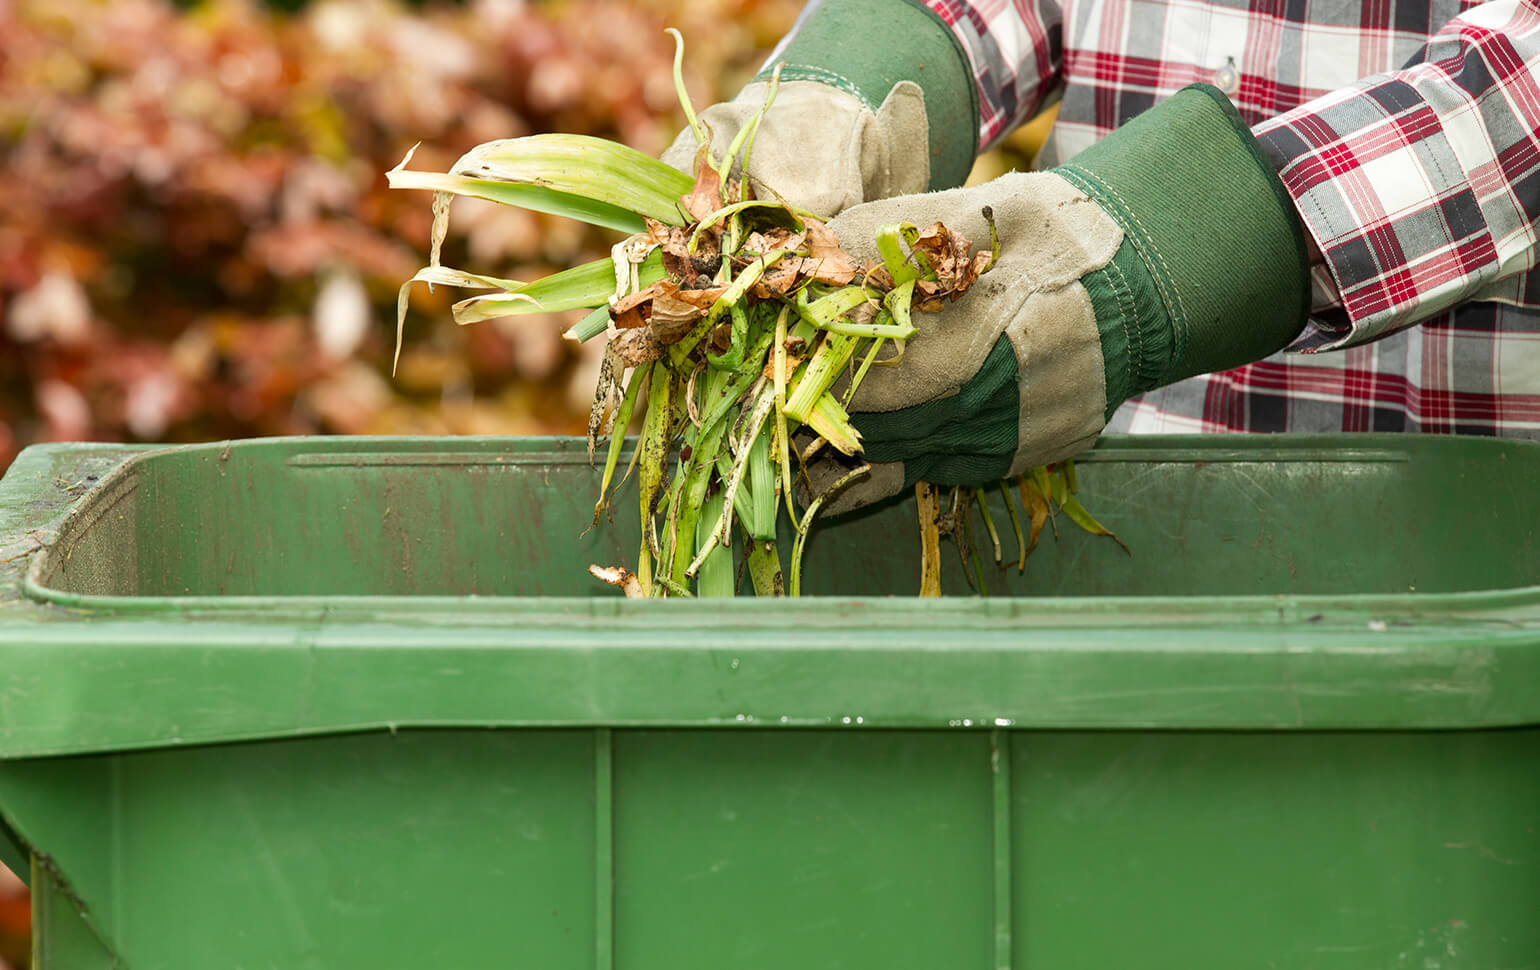 Don’t mistake compost for manure.